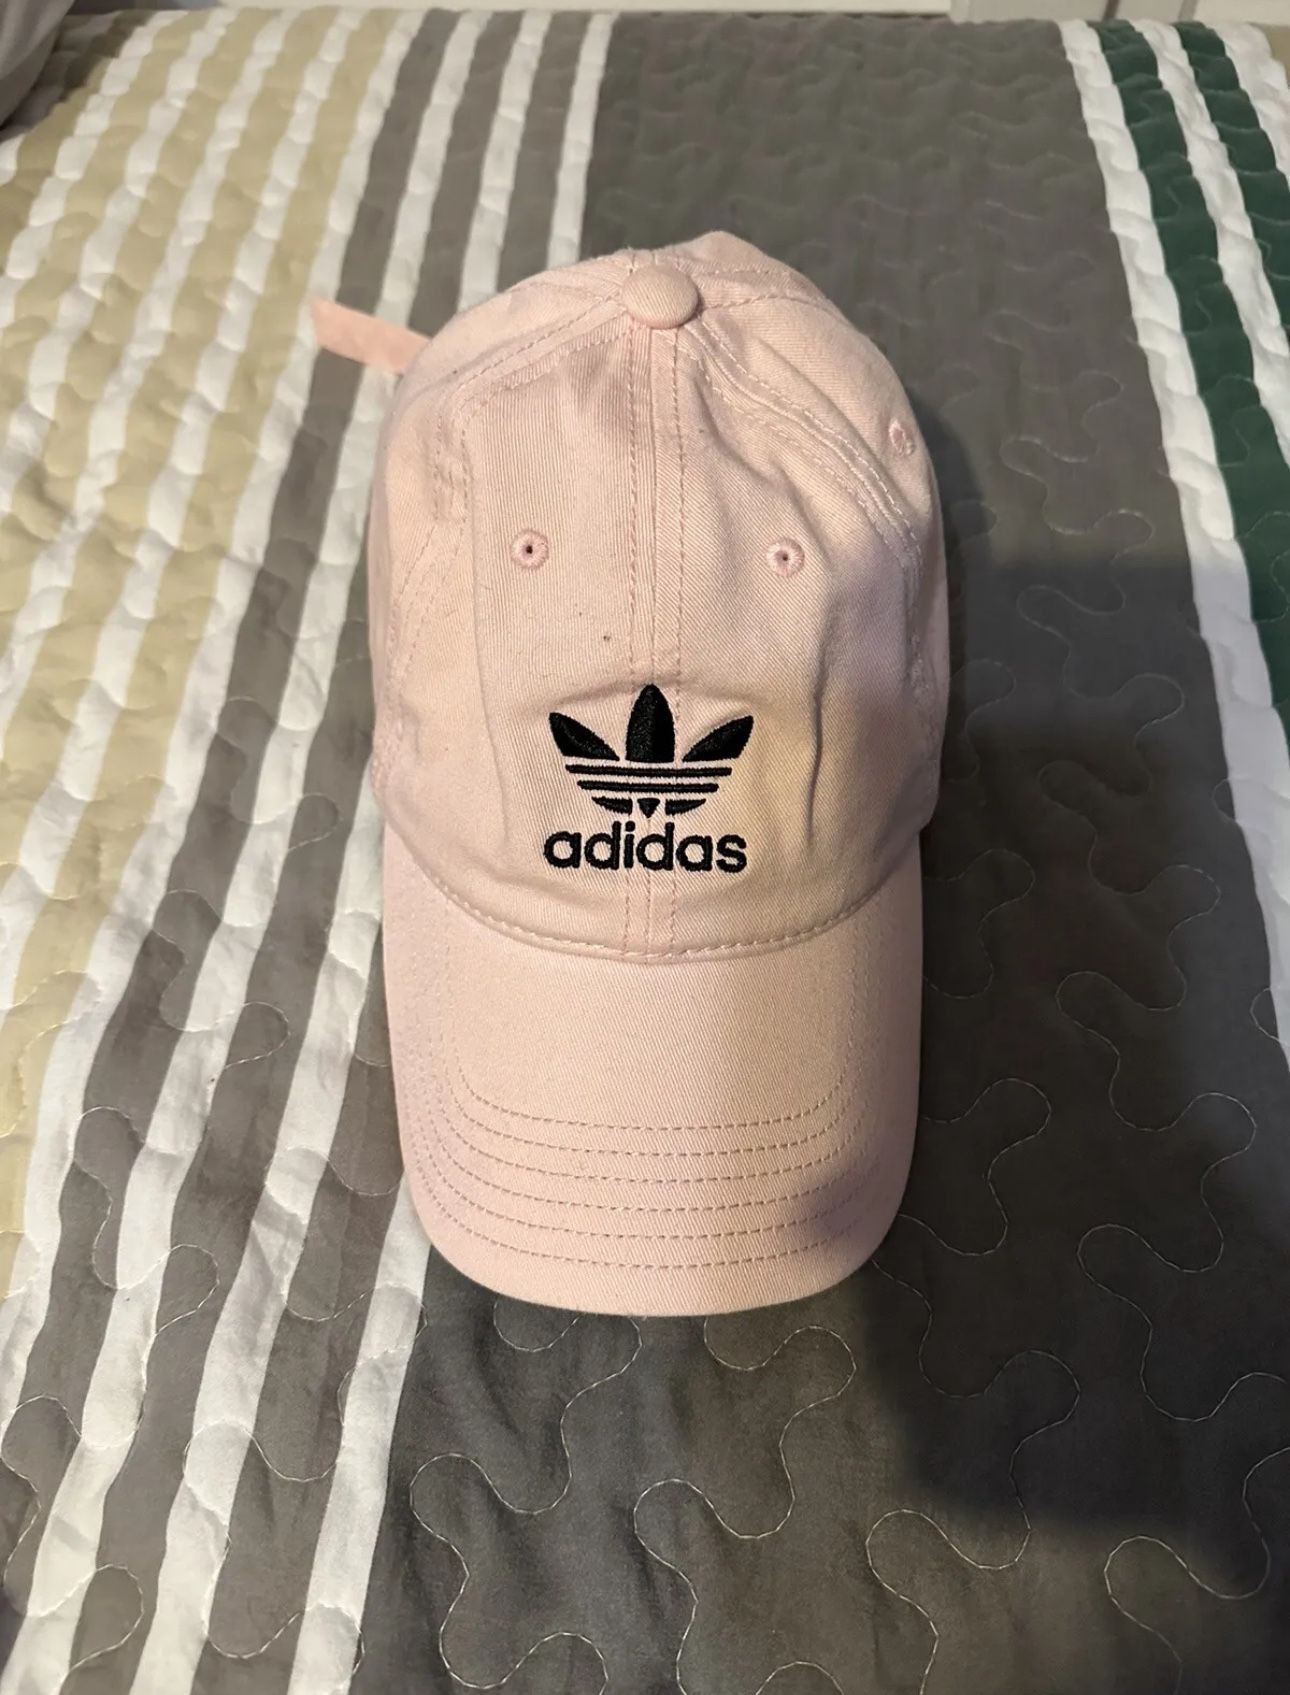 Adidas Originals Ball Cap Relaxed Adjustable Strap back Pink Hat One Size. 